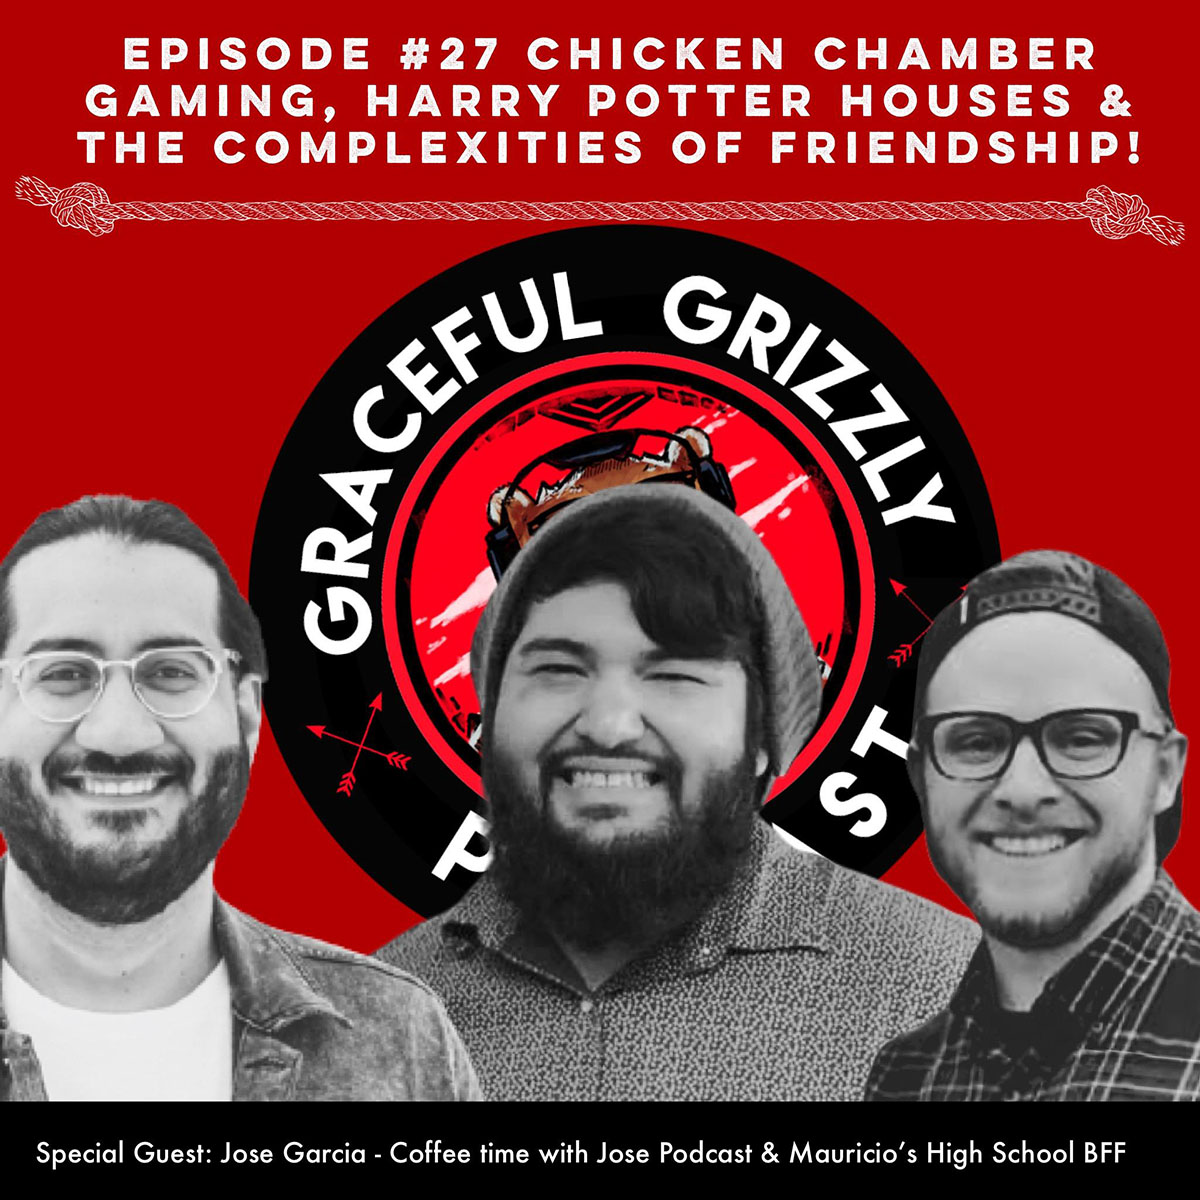 Episode 27 - Graceful Grizzly Podcast